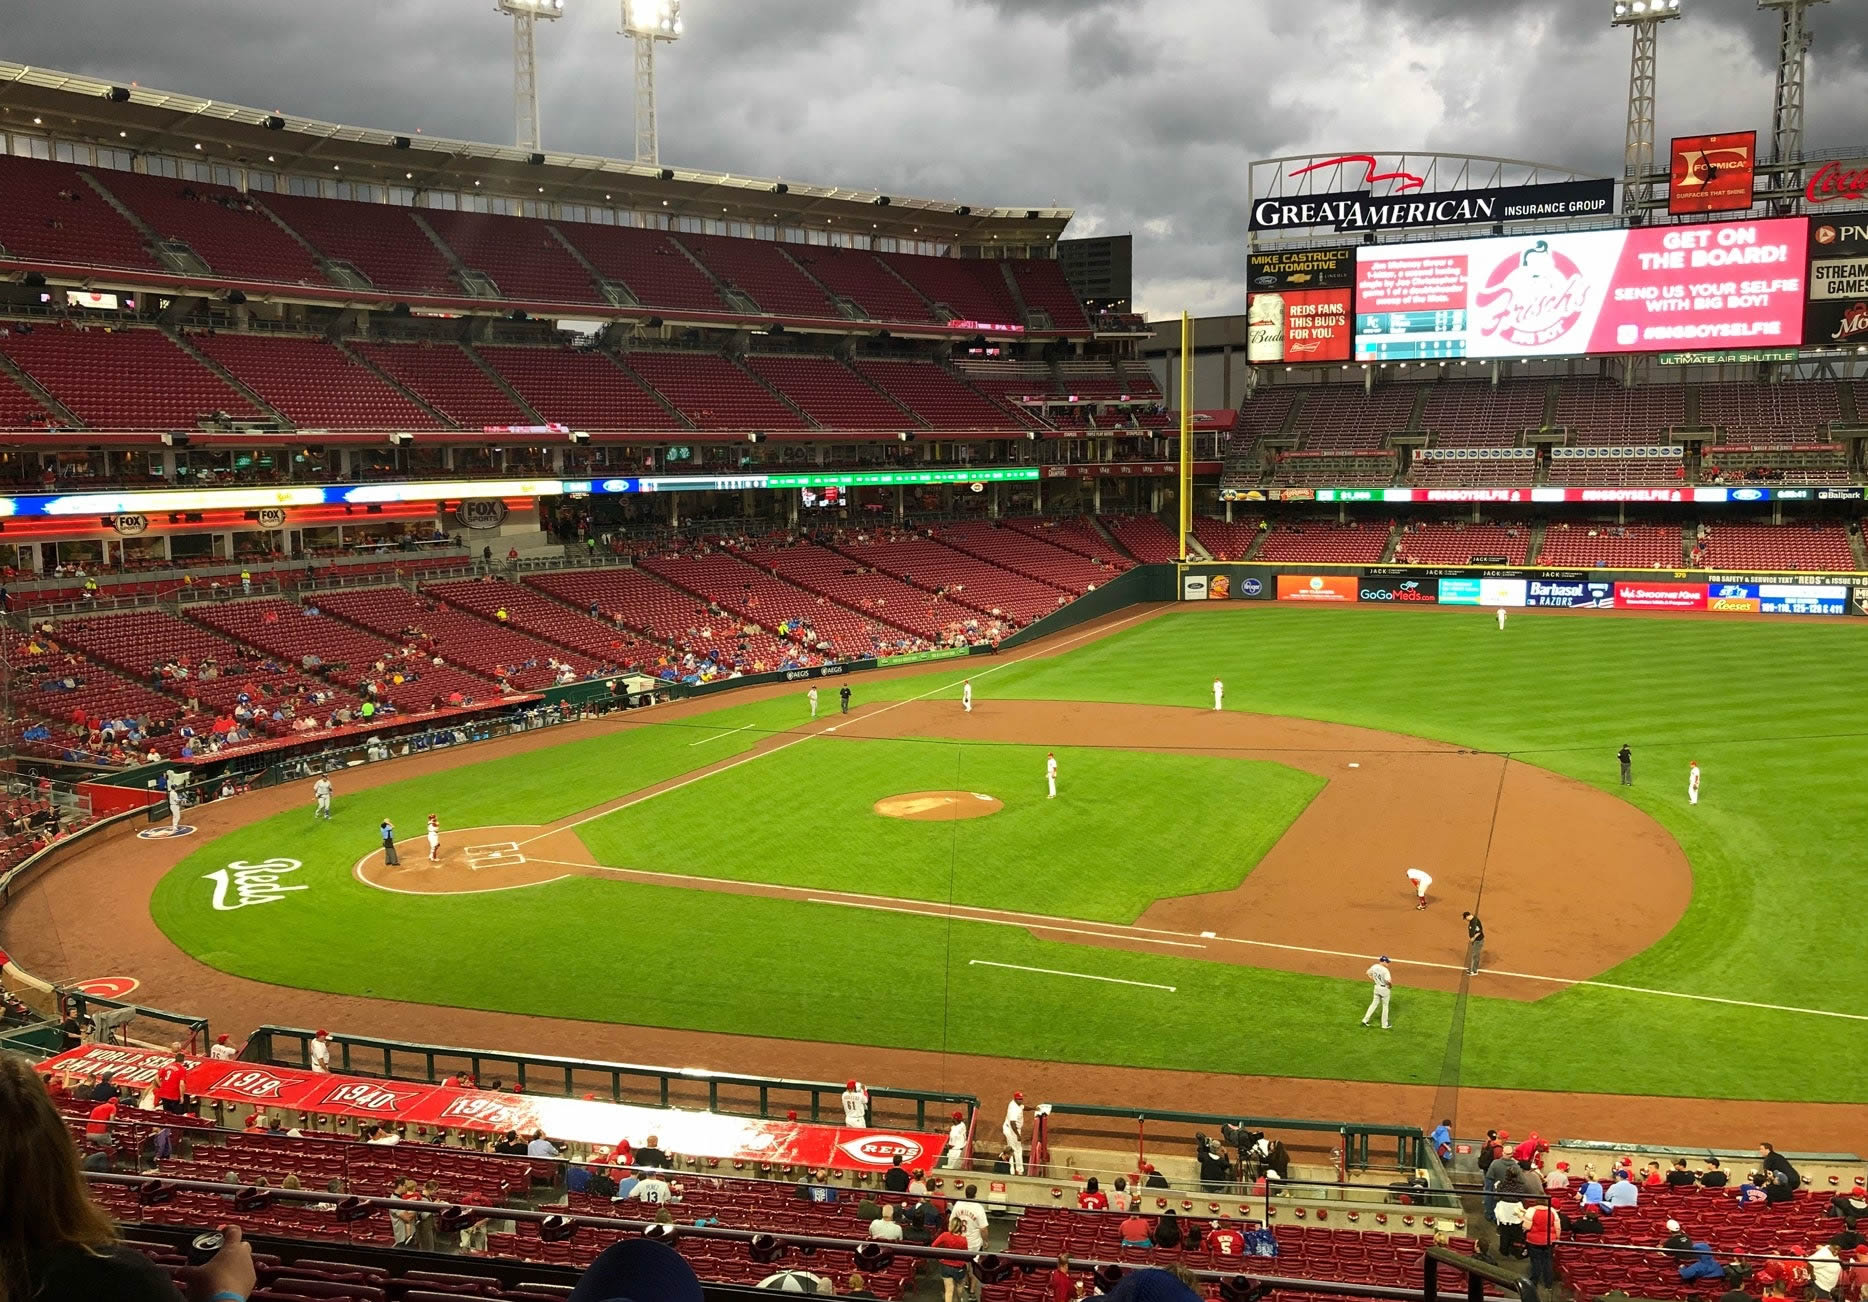 Section 304 at Great American Ball Park 